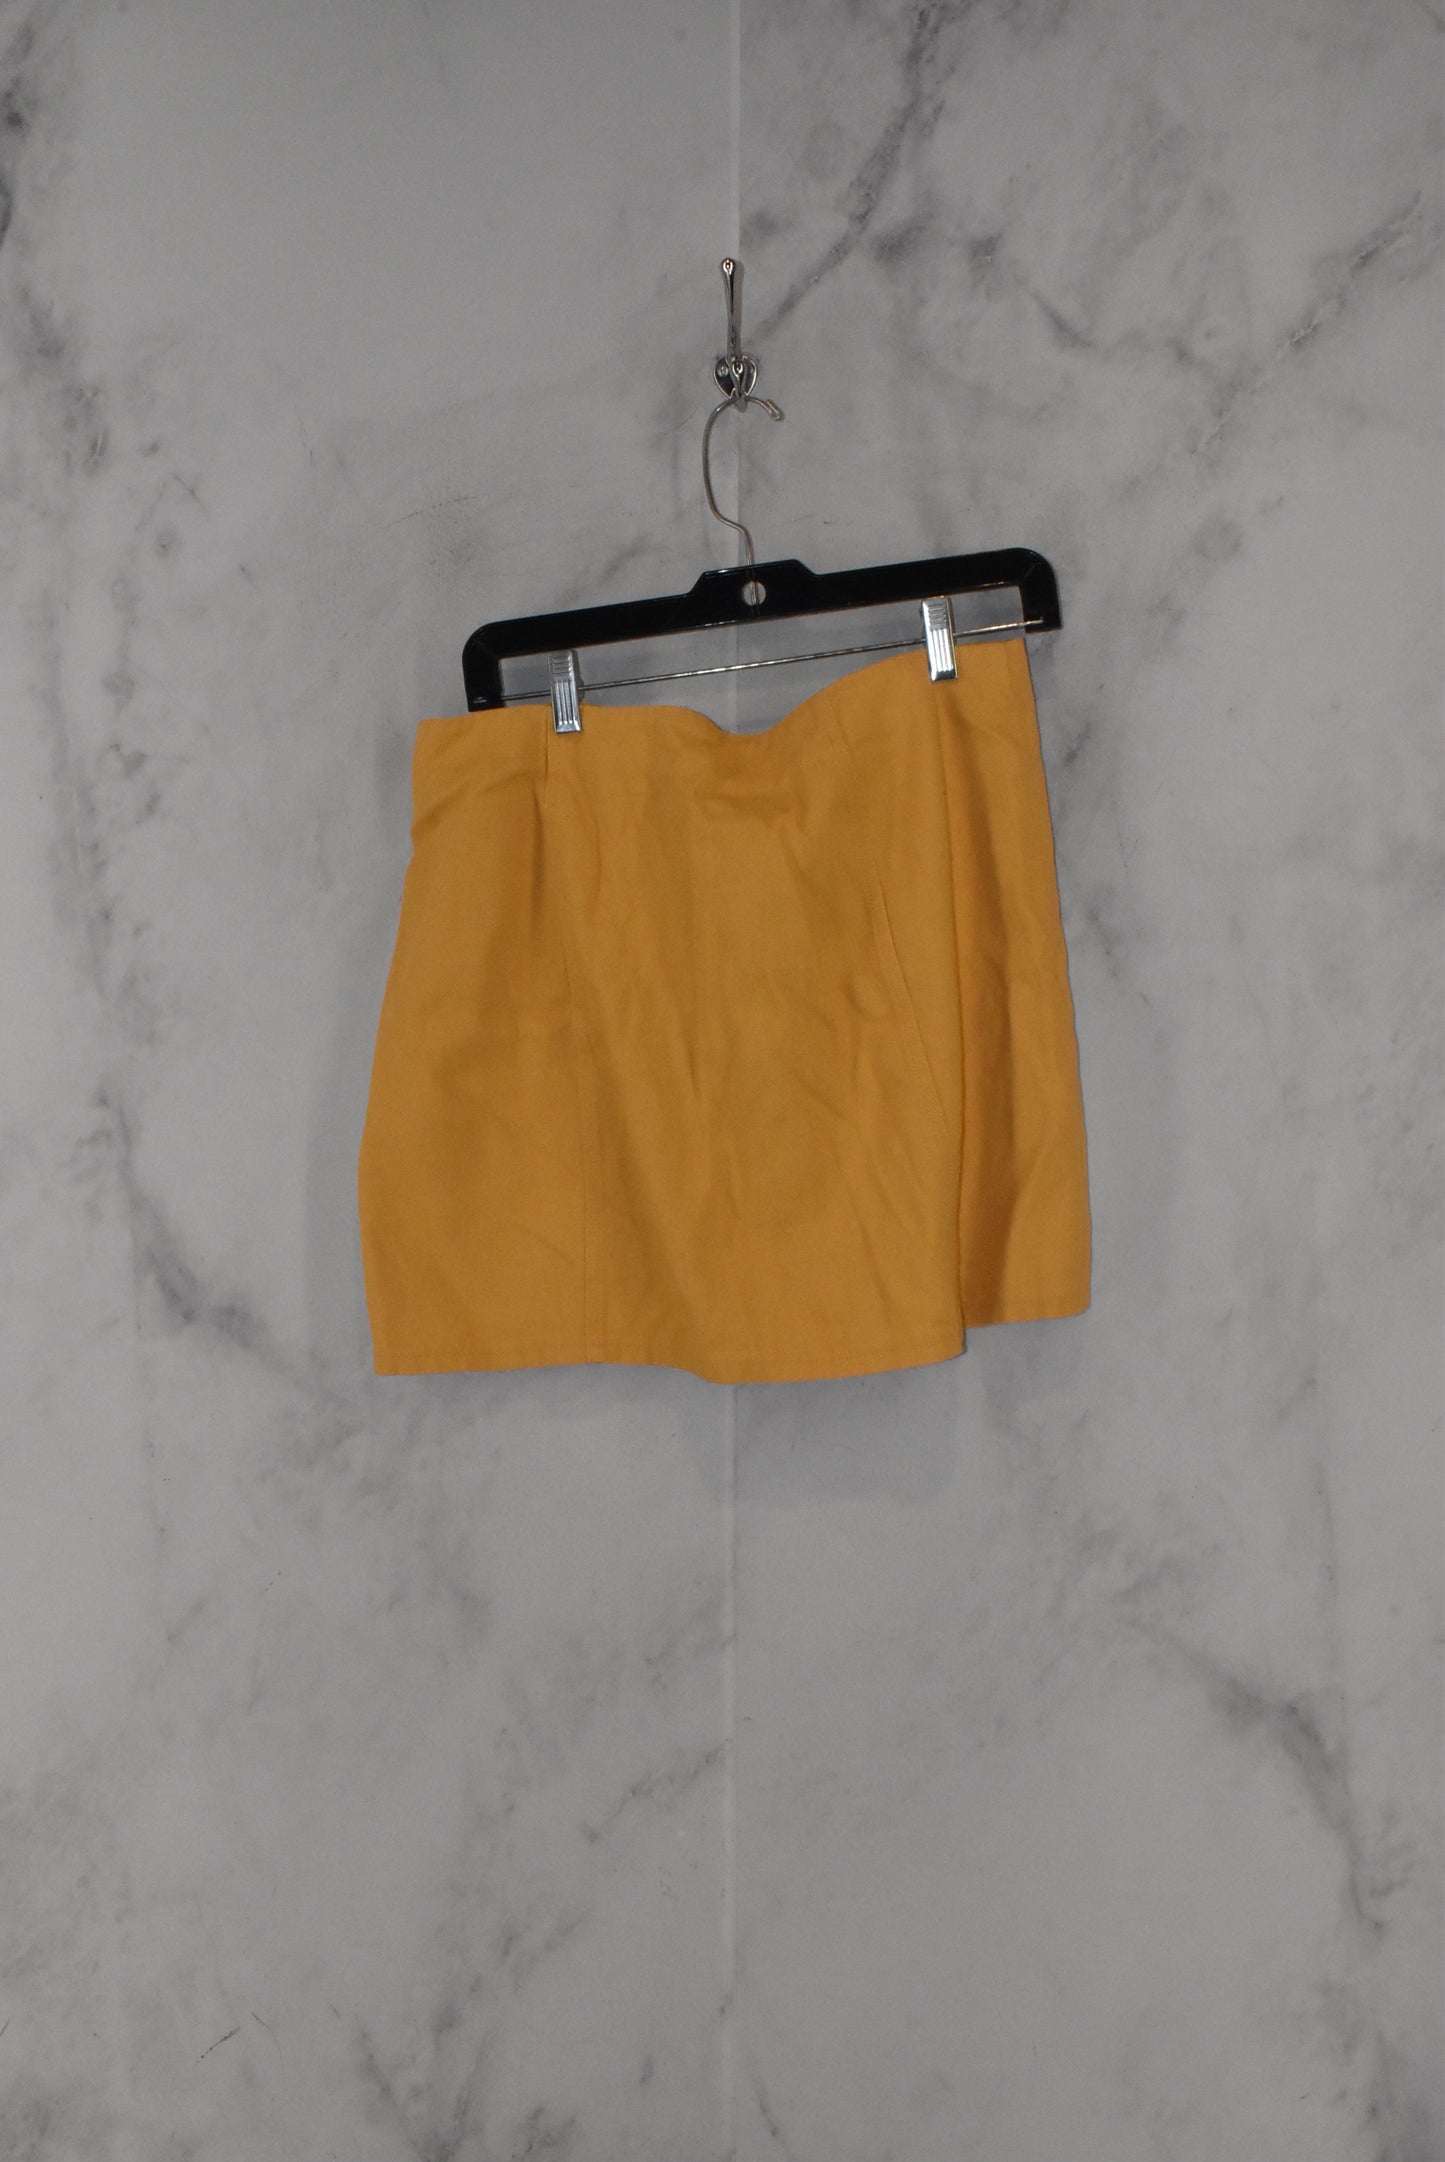 Skirt Mini & Short By Clothes Mentor  Size: Xl